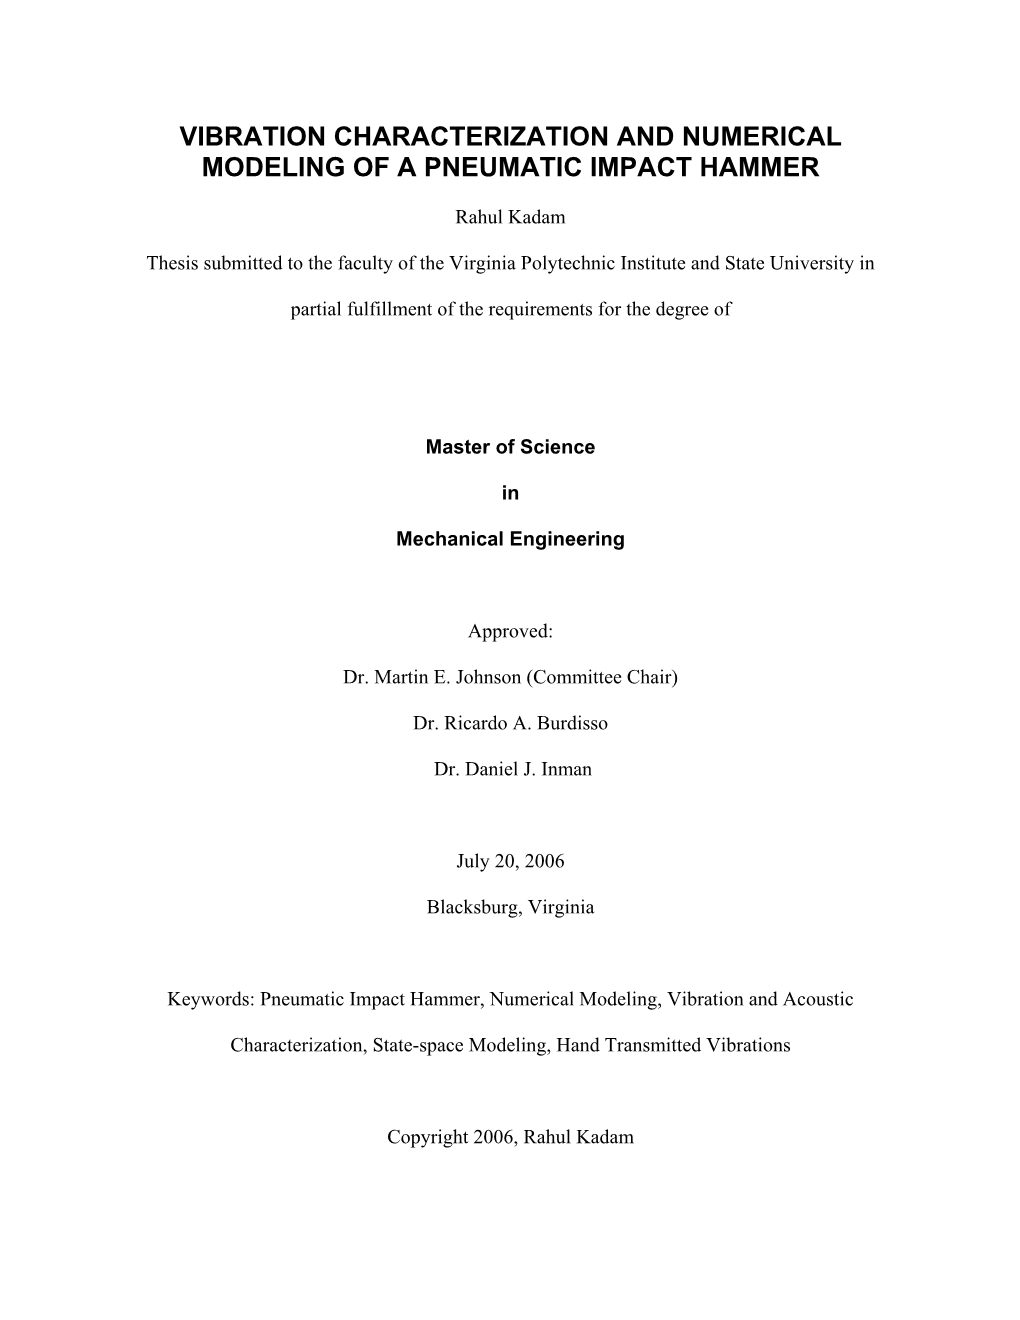 Vibration Characterization and Numerical Modeling of a Pneumatic Impact Hammer